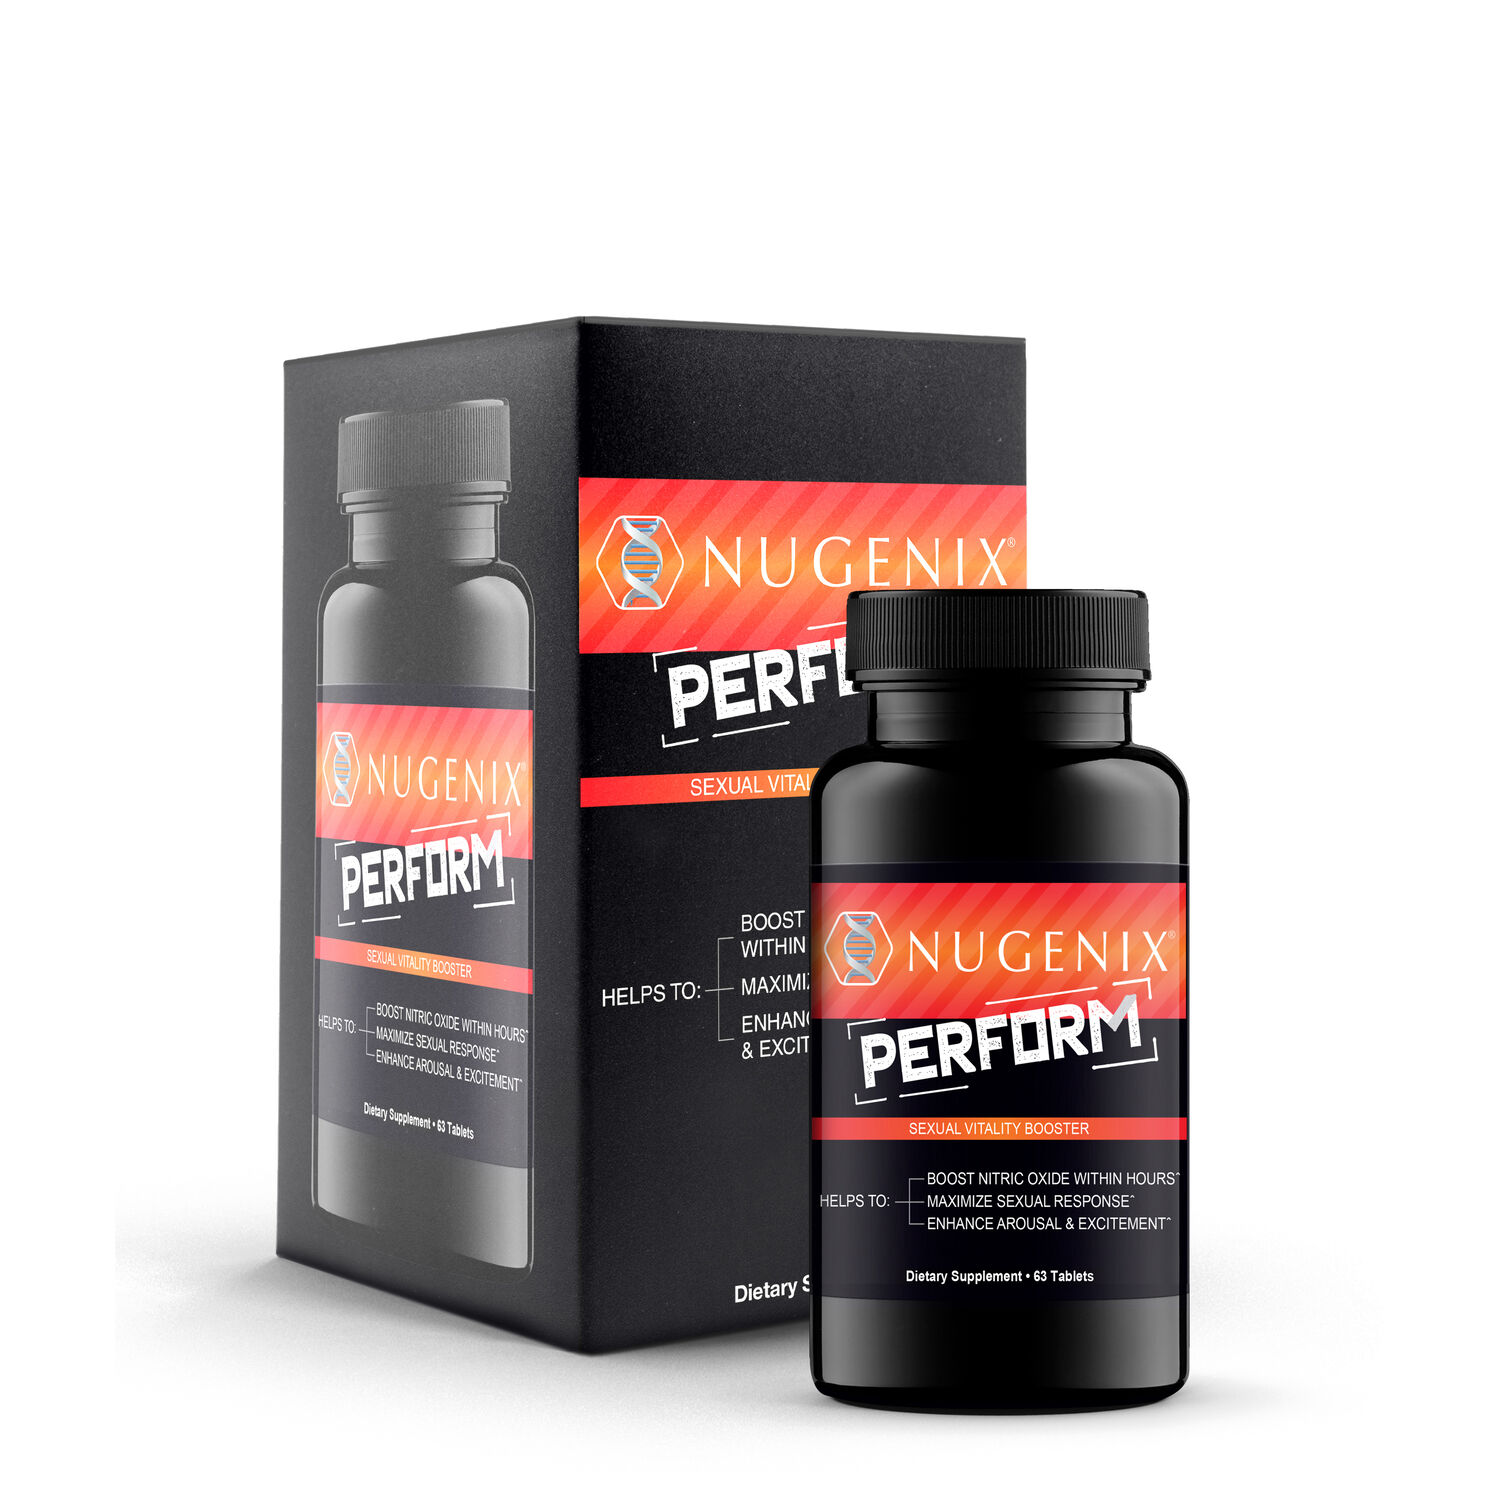 Nugenix Perform: Sexual Vitality Booster Healthy - 63 Tablets (21 Servings)